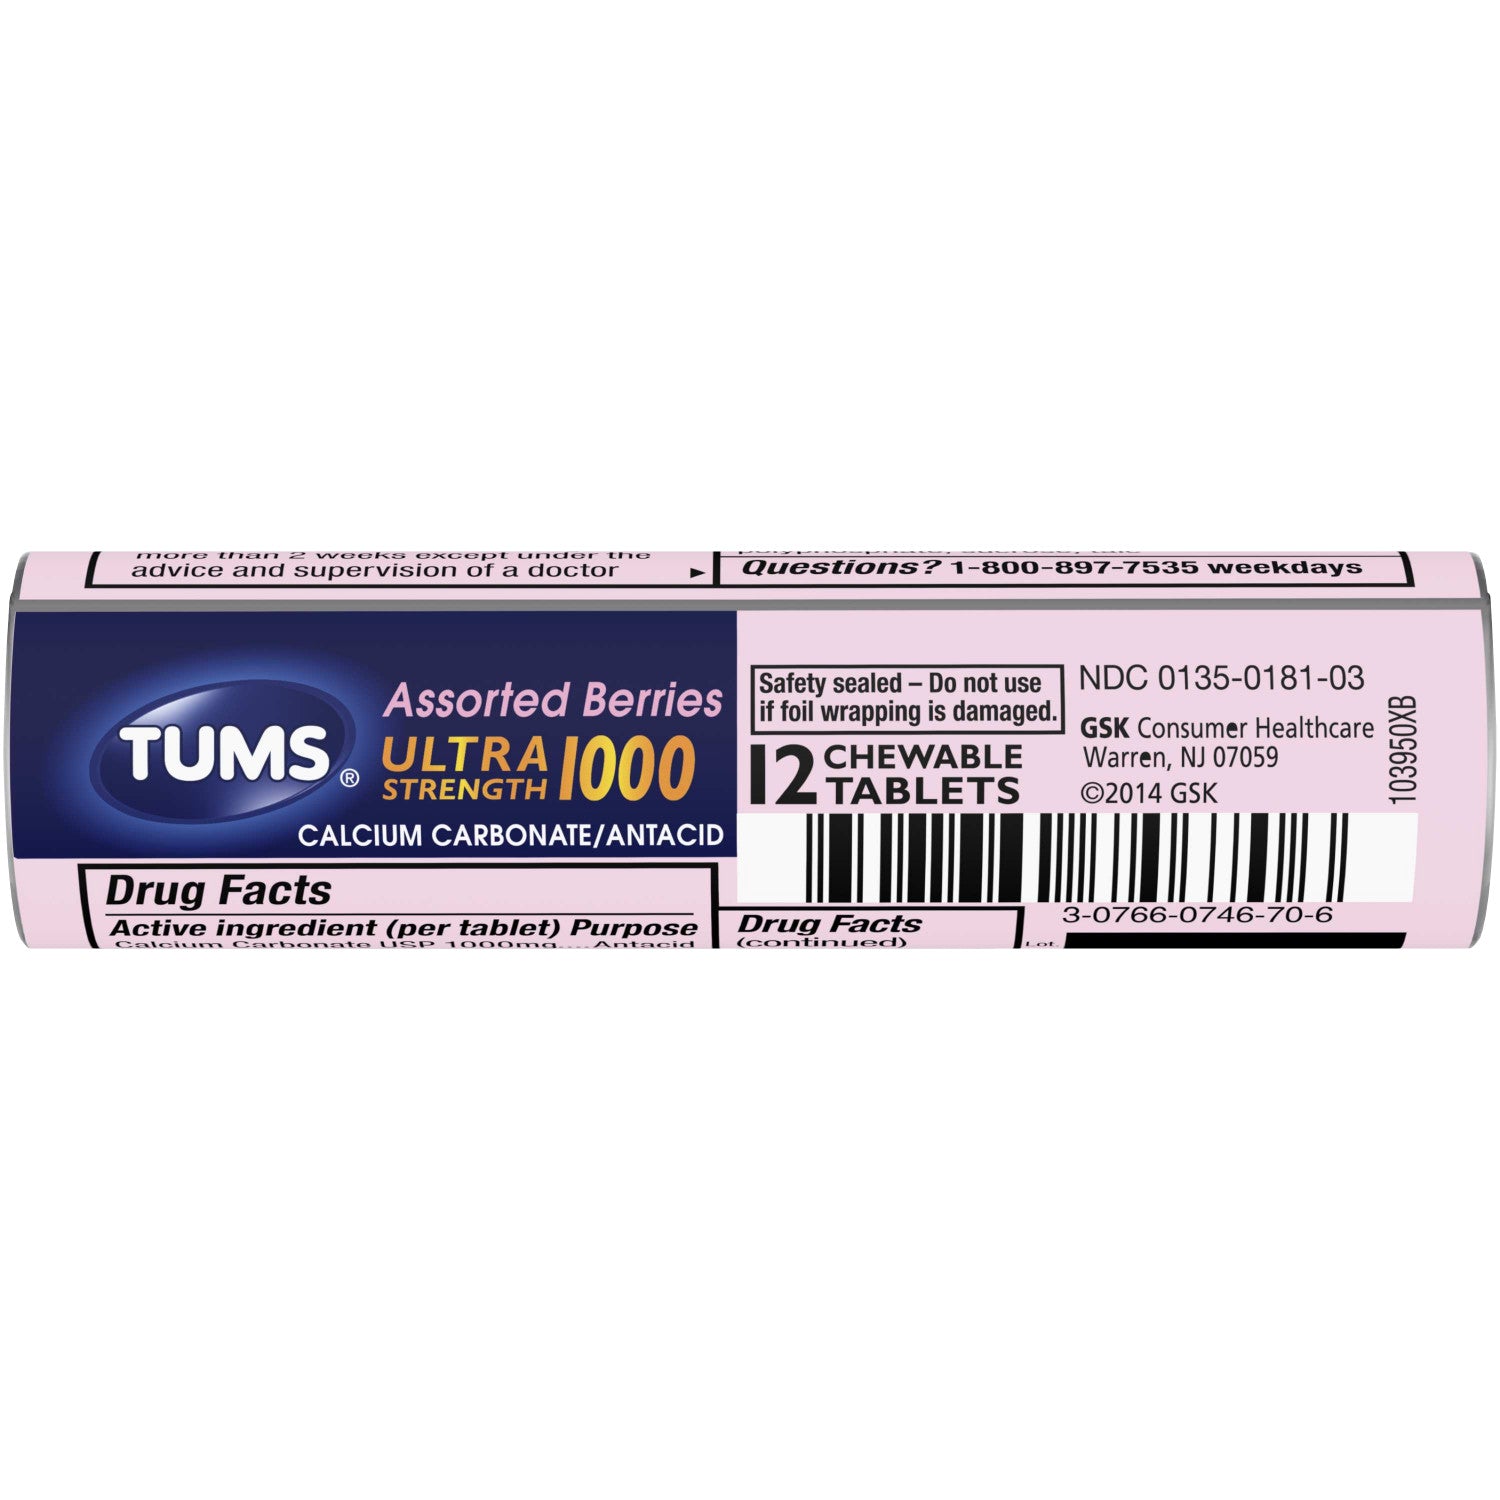 Tums Antacid Chewable Tablets for Heartburn Relief Ultra Strength Assorted Berries, 12 Tablets